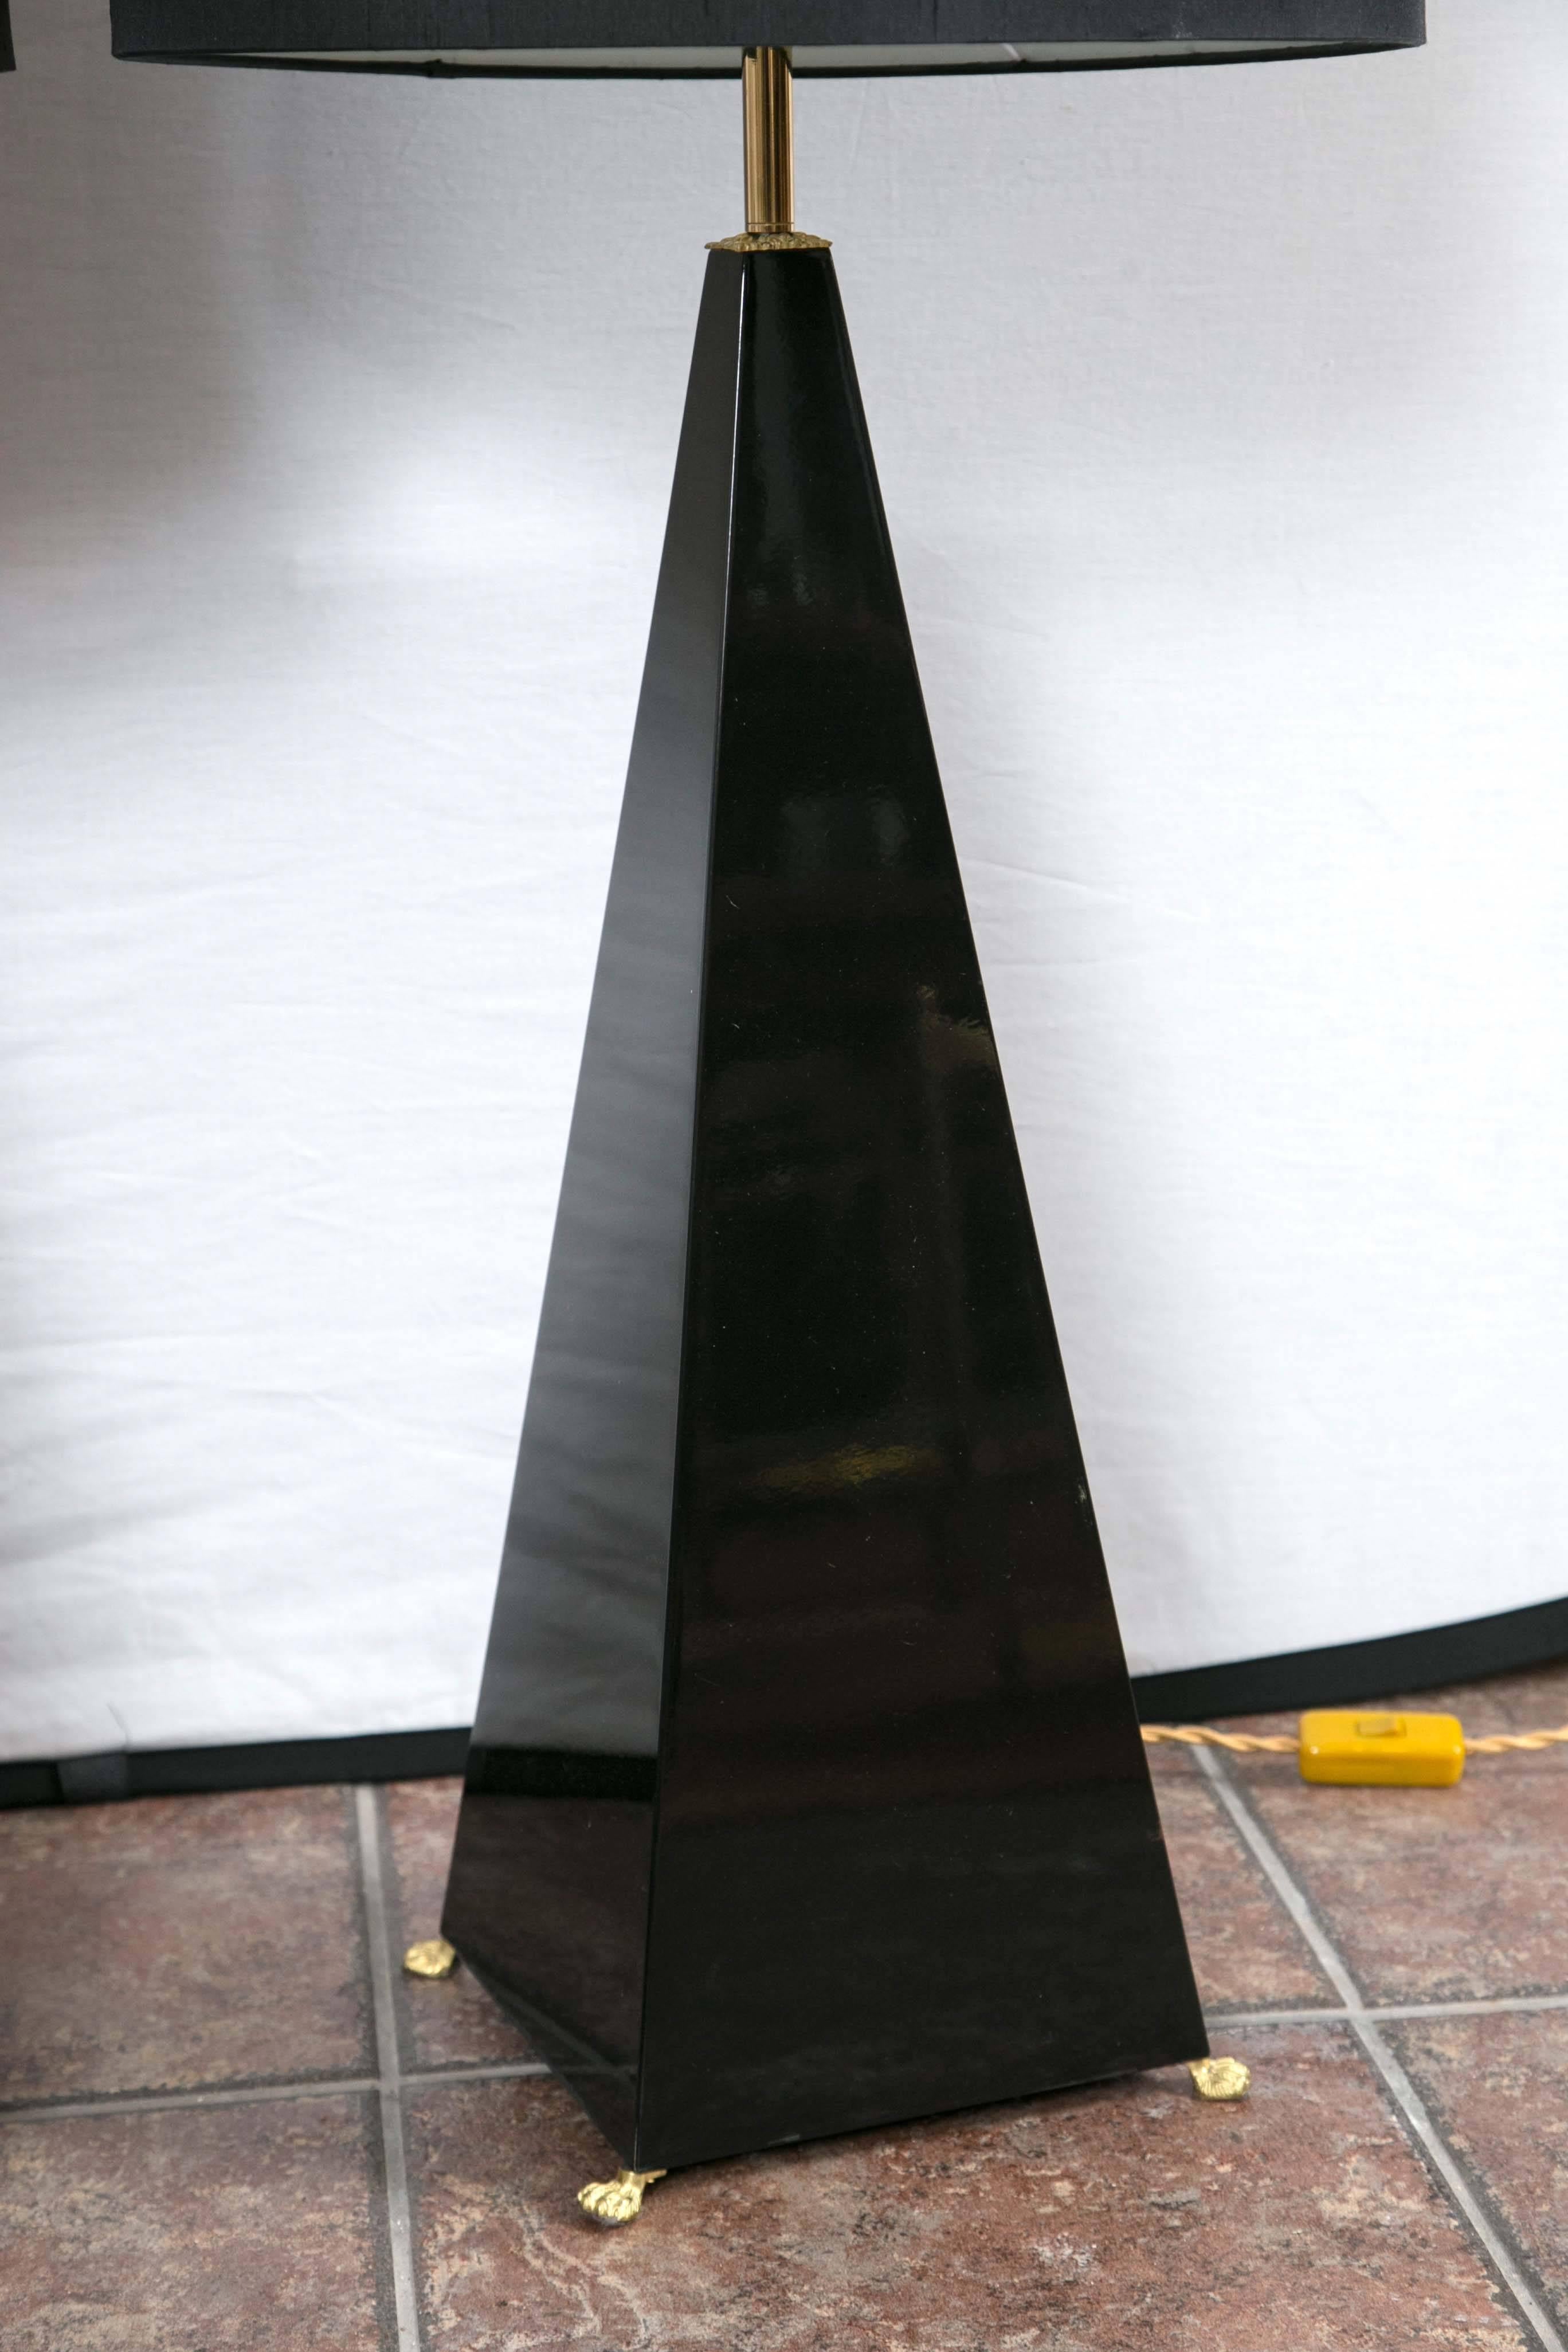 Pair of Jansen black lacquer pyramid lamps with black shades.